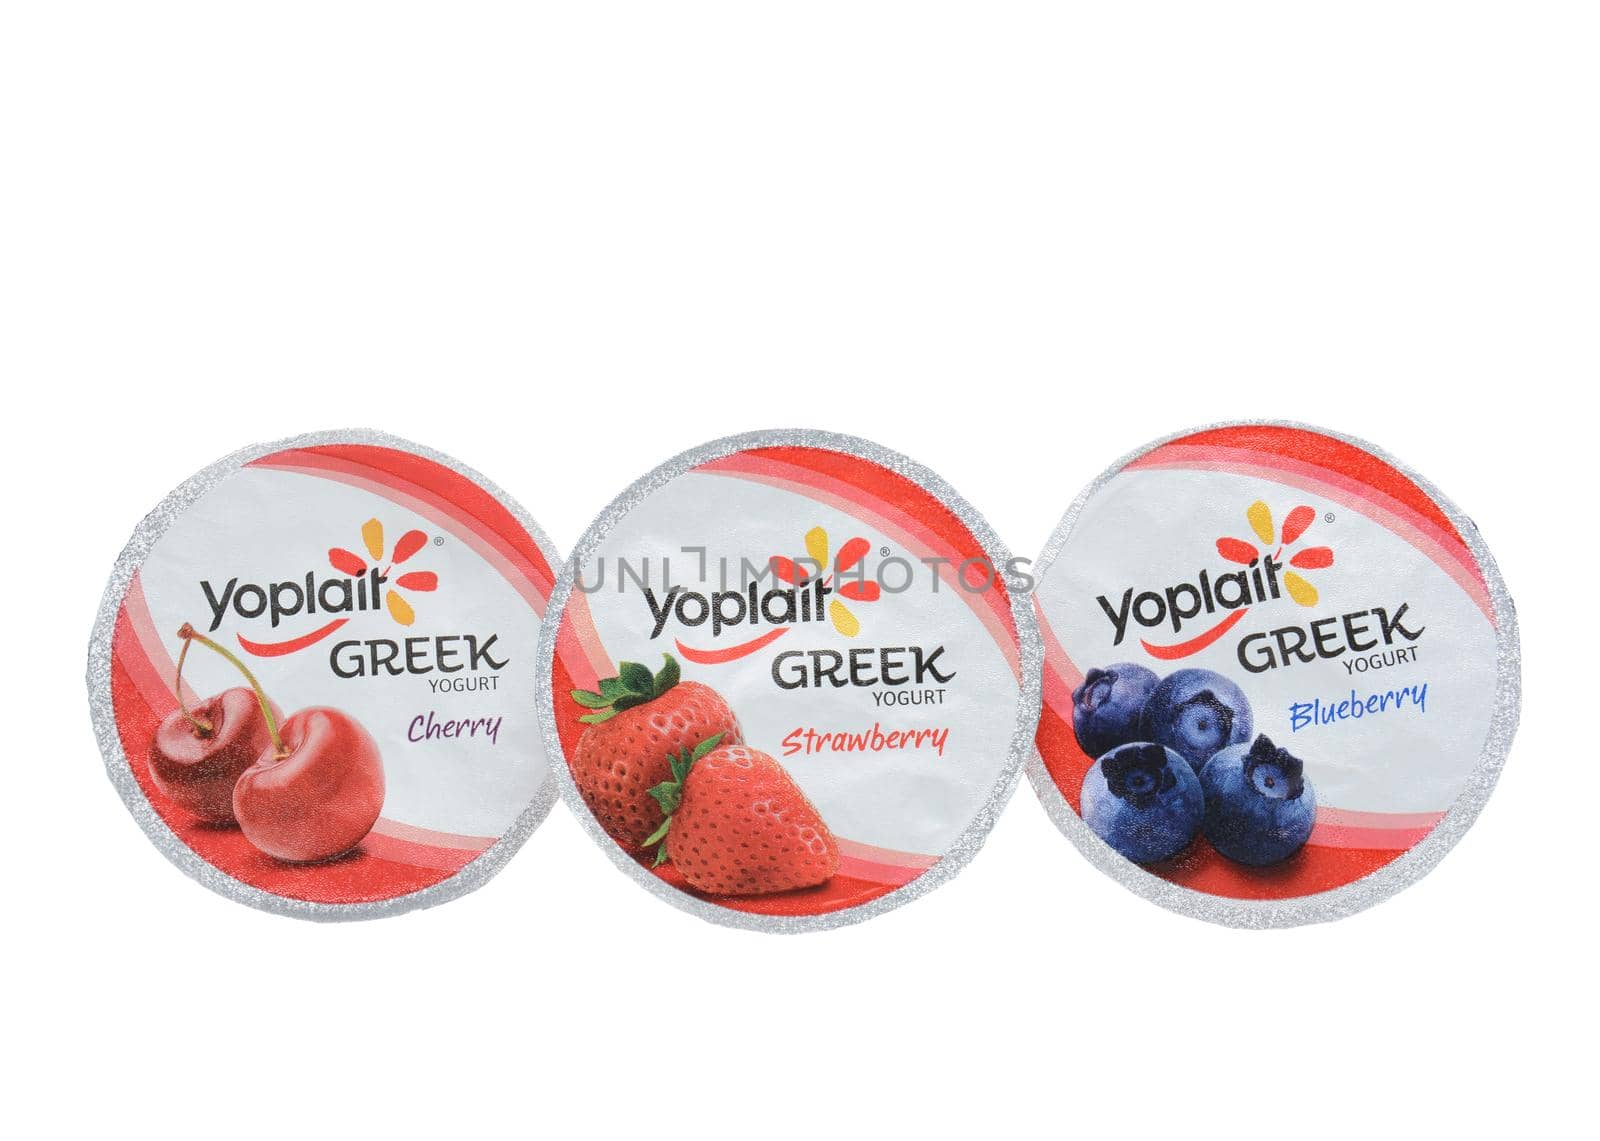 IRVINE, CA - SEPTEMBER 15, 2014: Three different containers of Yoplait Greek Yogurt isolated on white. In 1965, two French dairy co-operatives, Yola and Coplait, merged, becoming Yoplait.